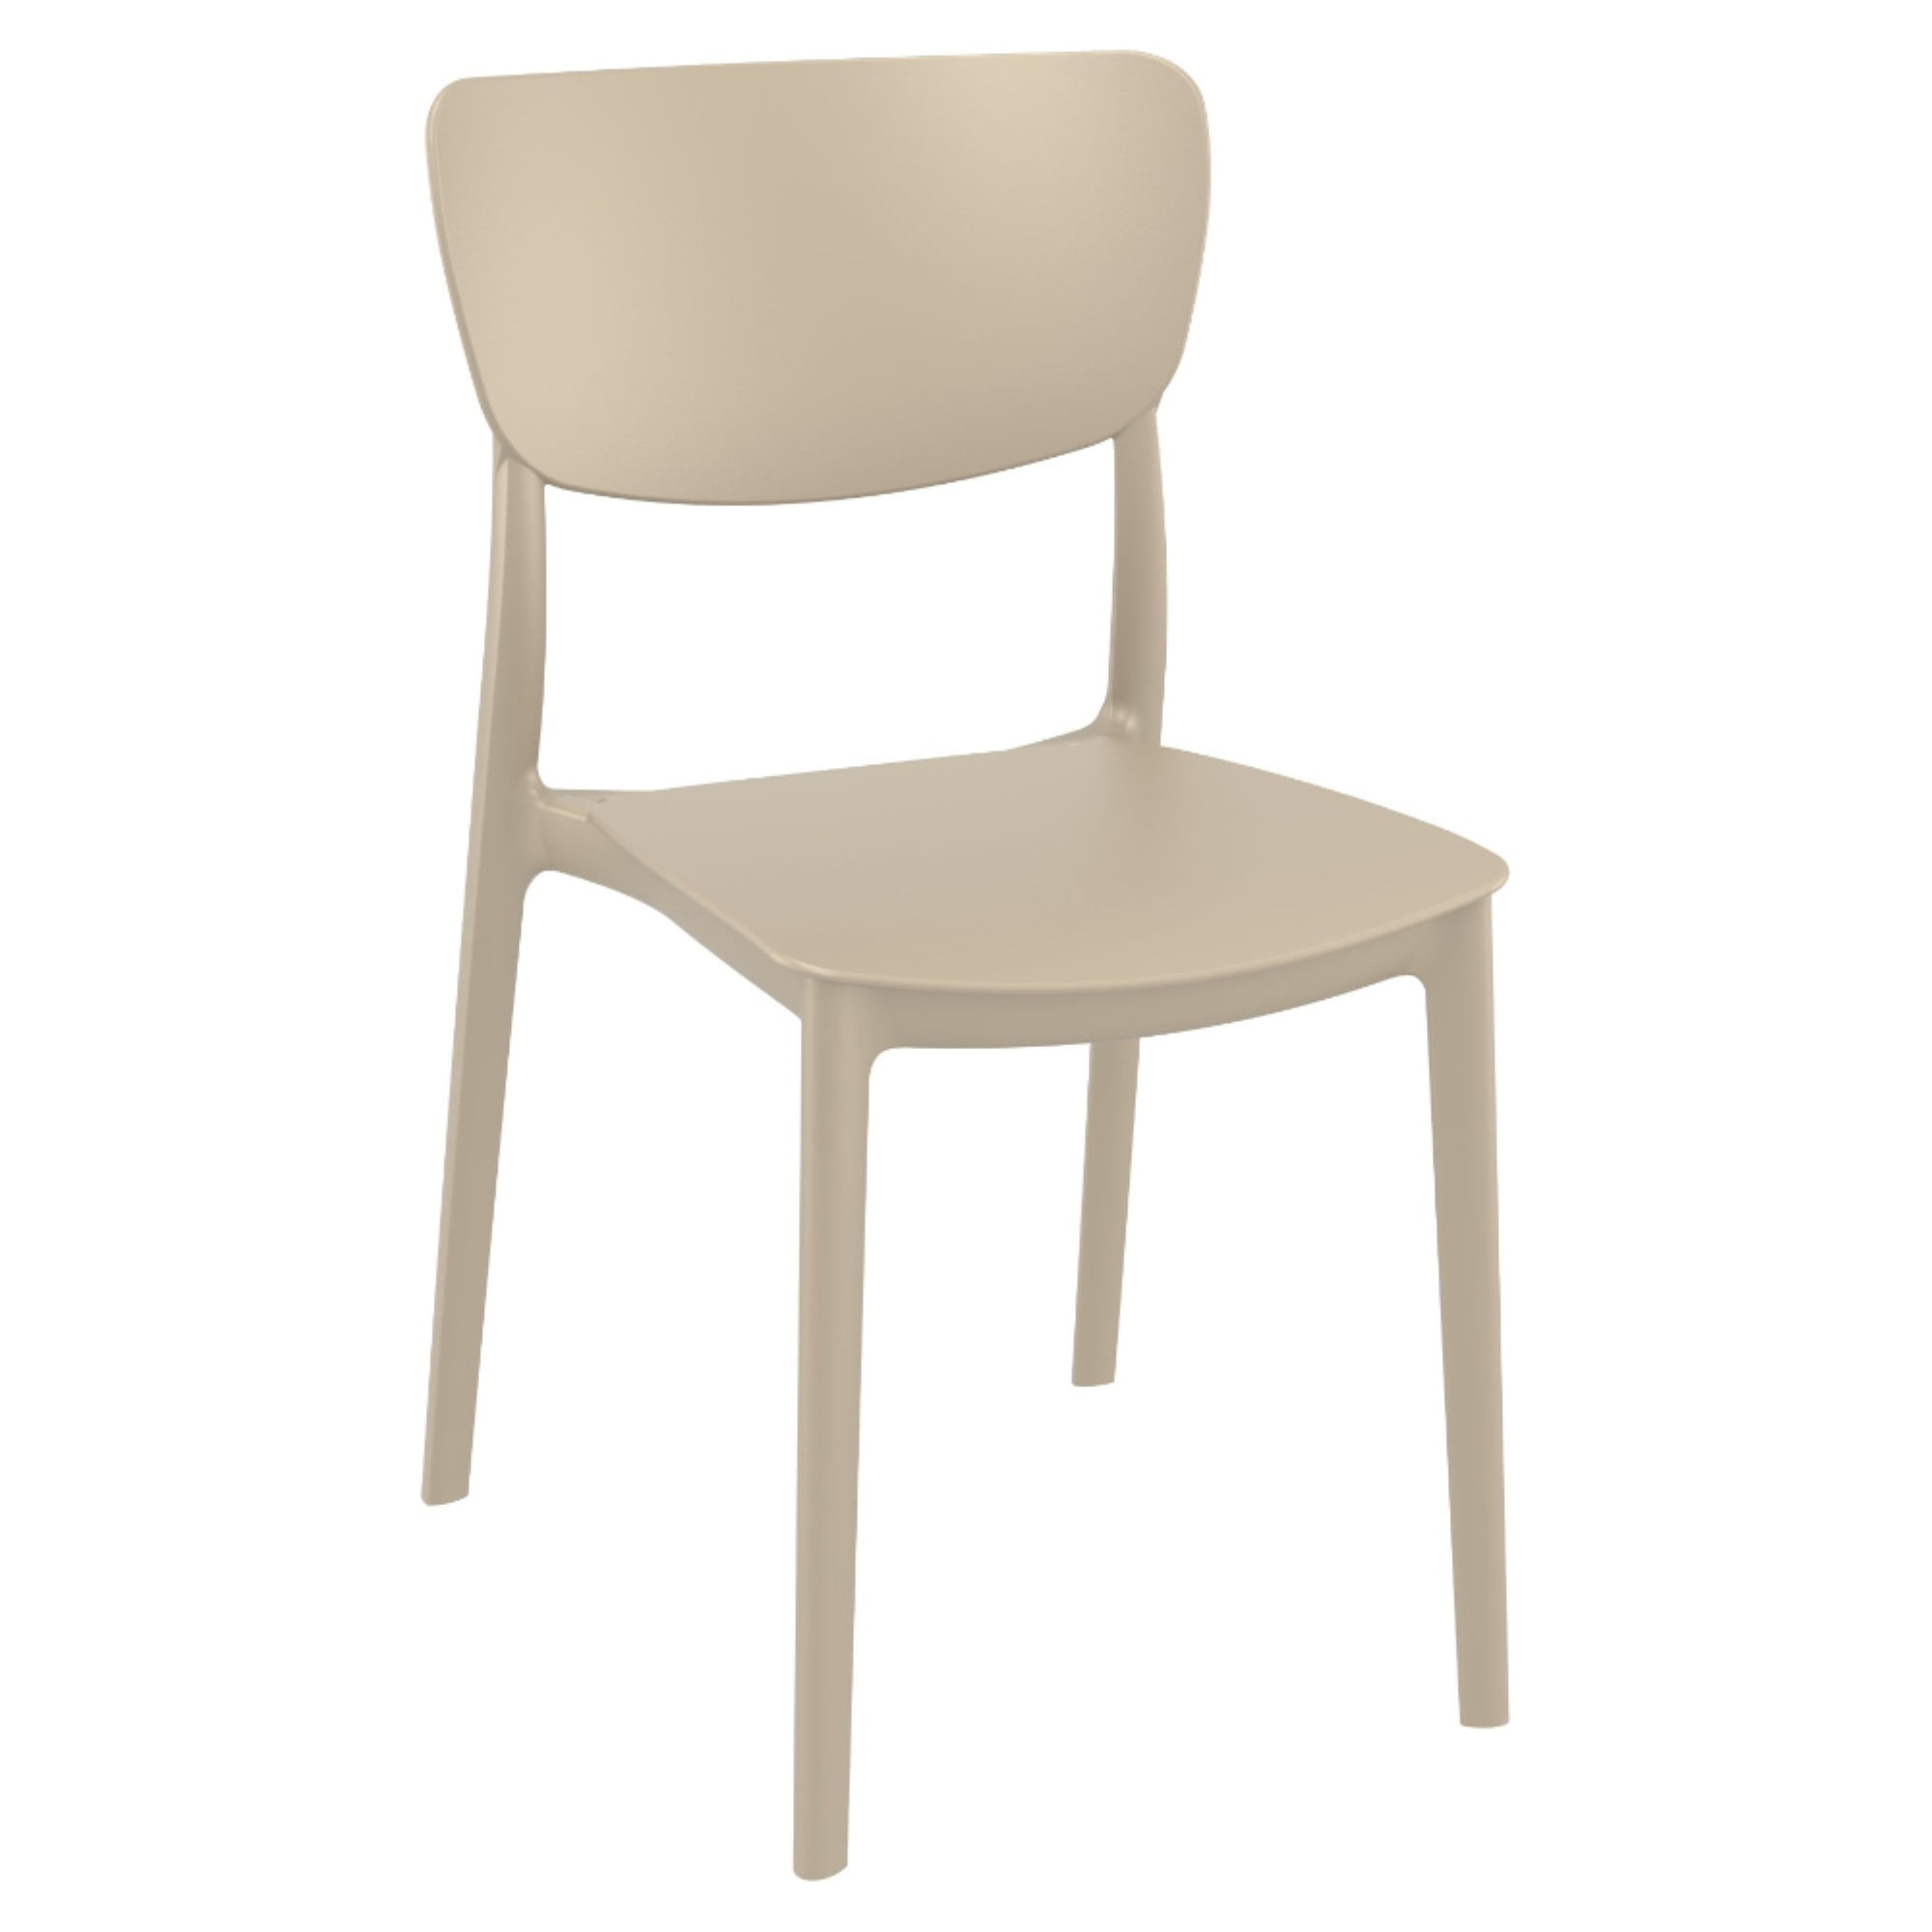 Compamia ISP127-DVR 32.3 x 17.7 x 21 in. Monna Outdoor Dining Chair Taupe -  set of 2